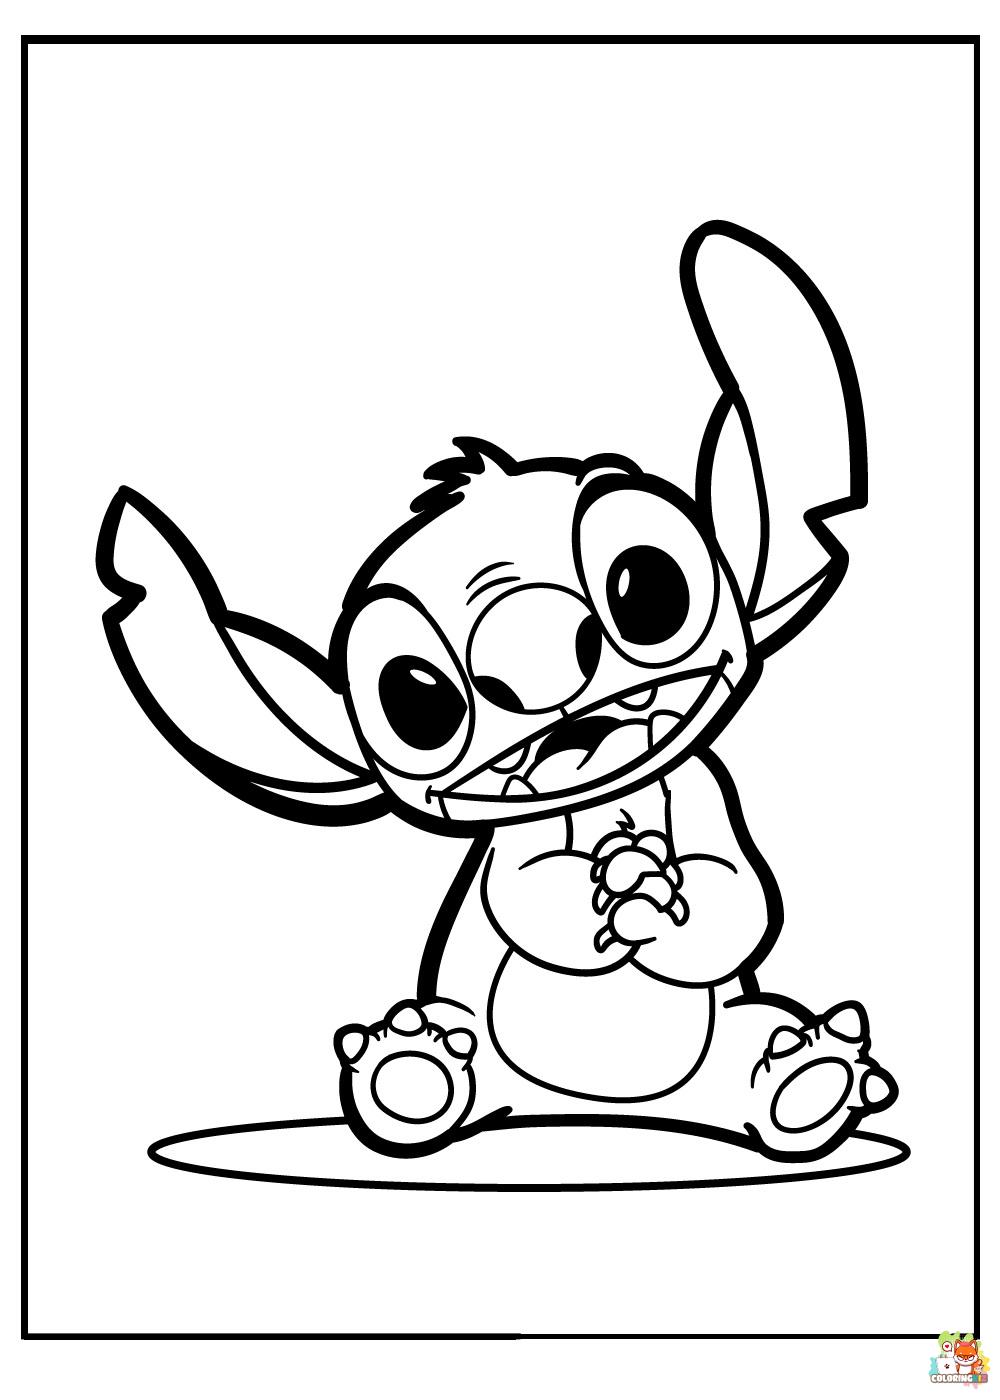 Happy Stitch Coloring Pages 4